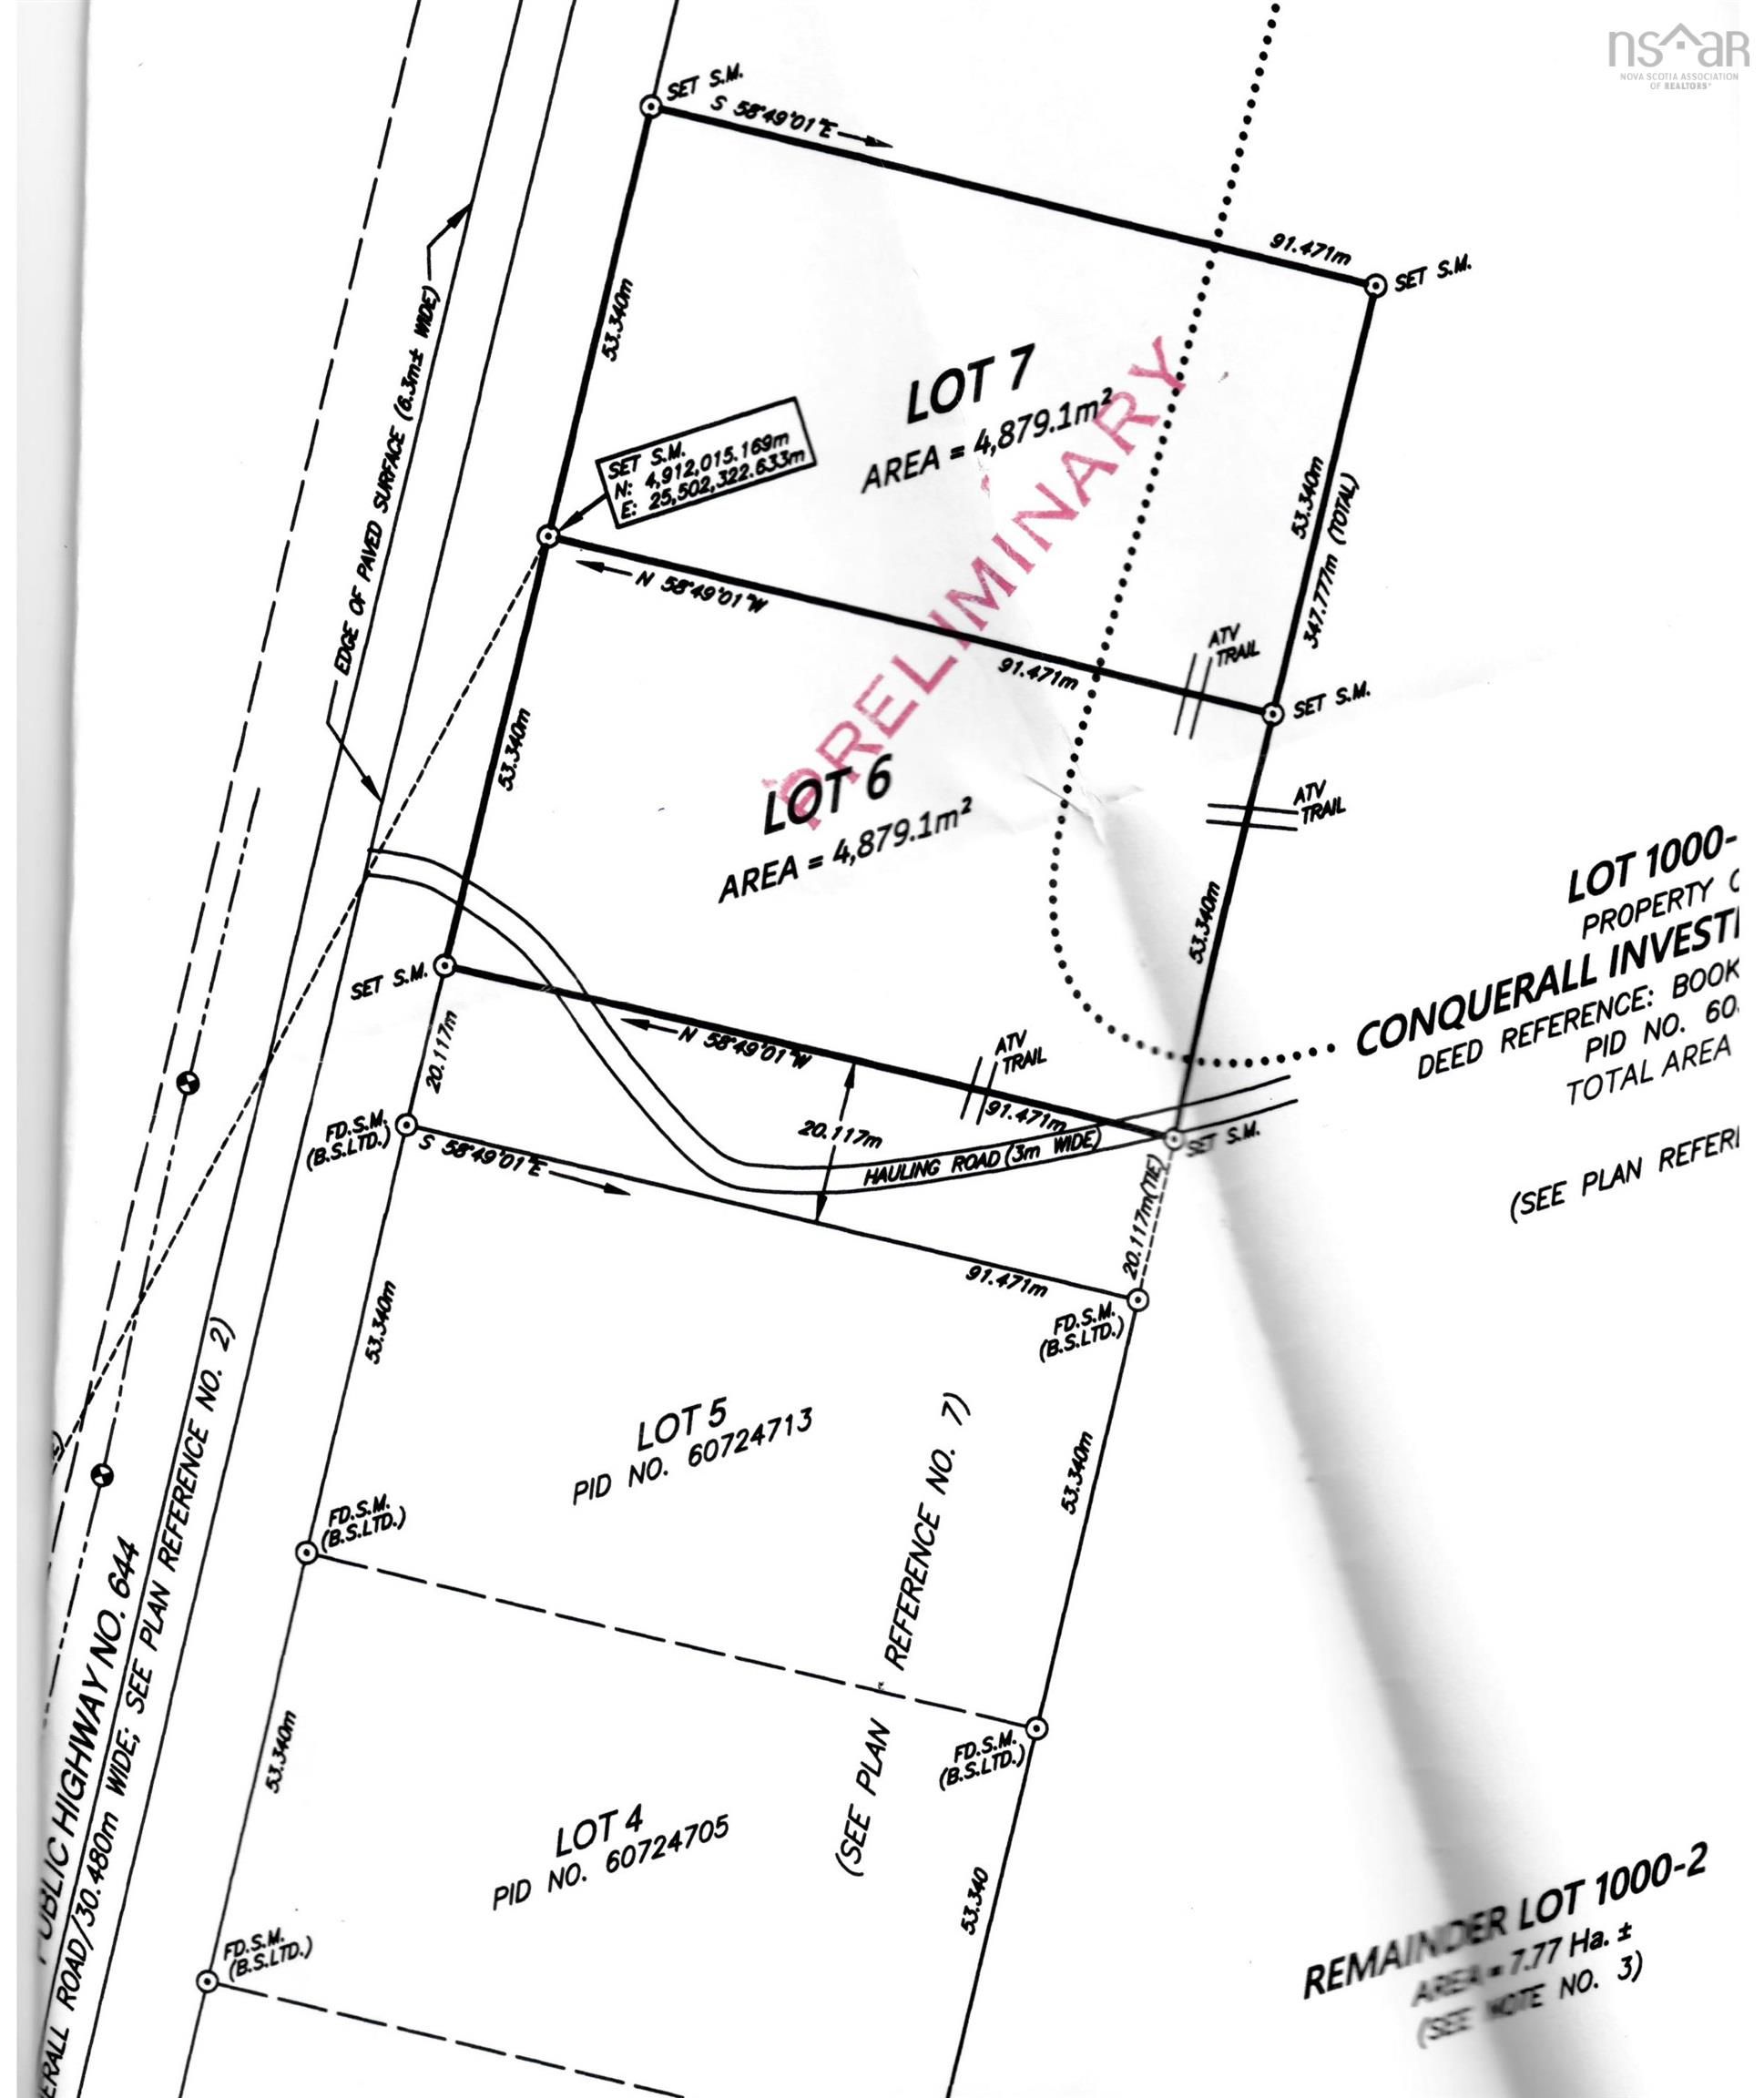 Main Photo: Lot 7 Conquerall Road in Conquerall Bank: 405-Lunenburg County Vacant Land for sale (South Shore)  : MLS®# 202325595